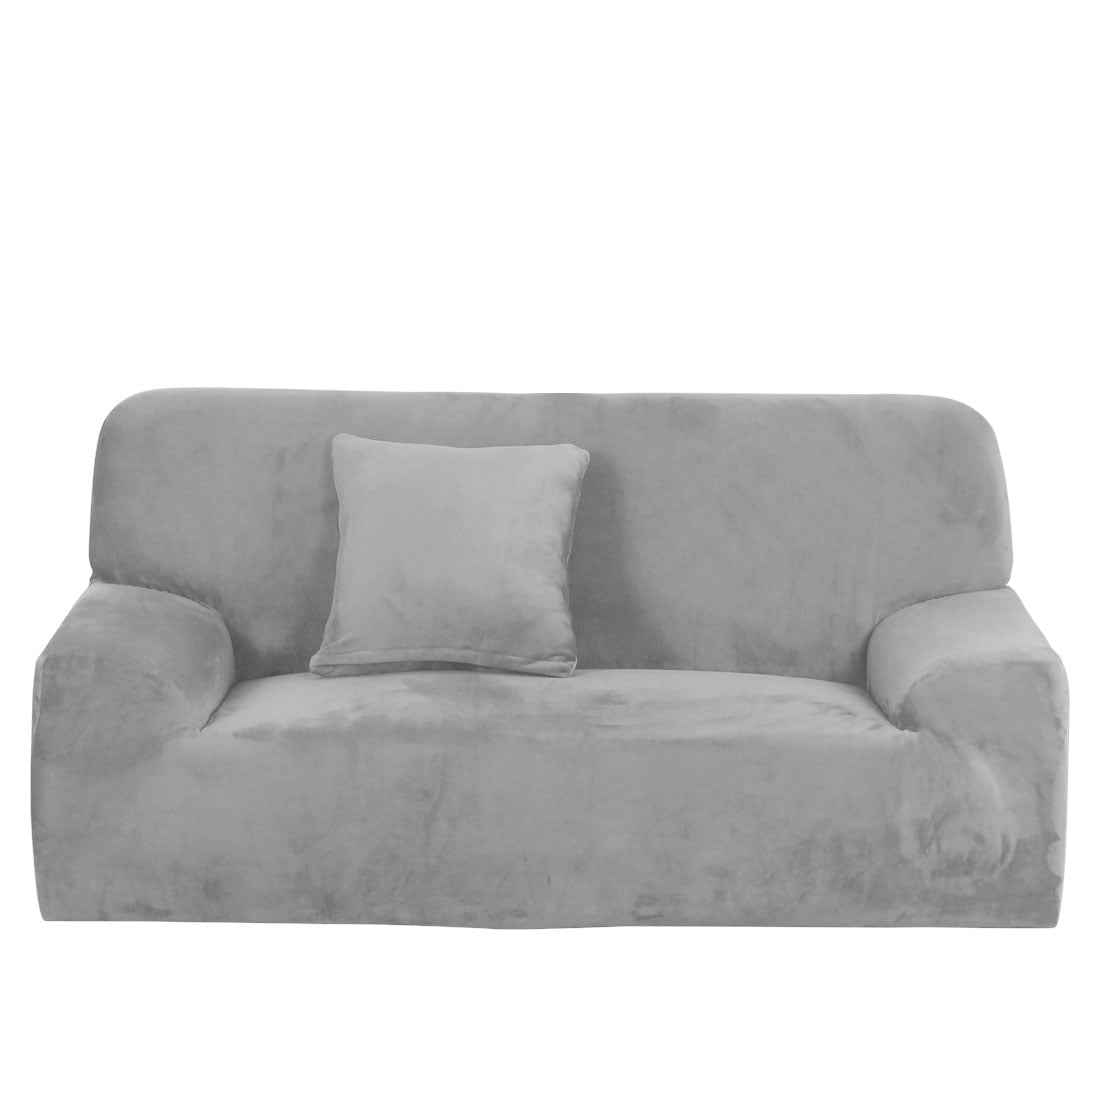 Details about   Tub Chair Armchair Sofa Covers Plush Elastic Velvet Fabric Cover Seat Slipcover 